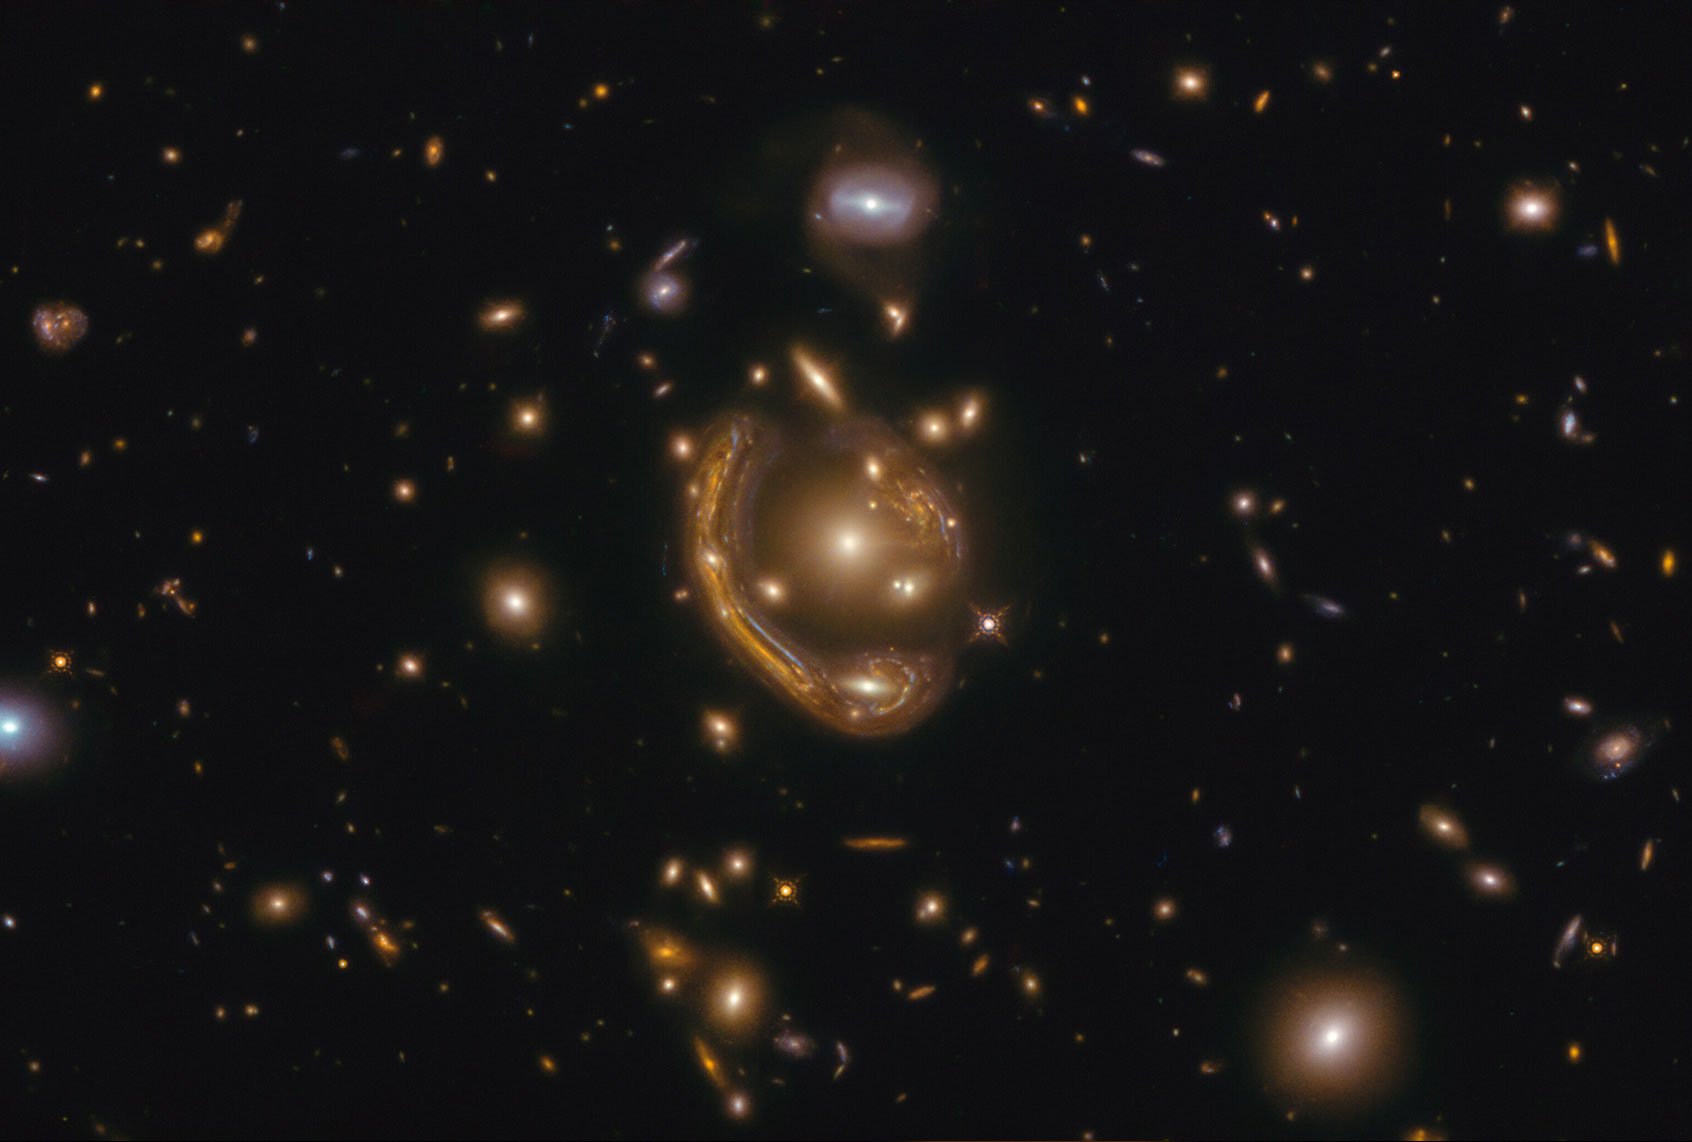 What was the „melted ring“ that Hubble saw?